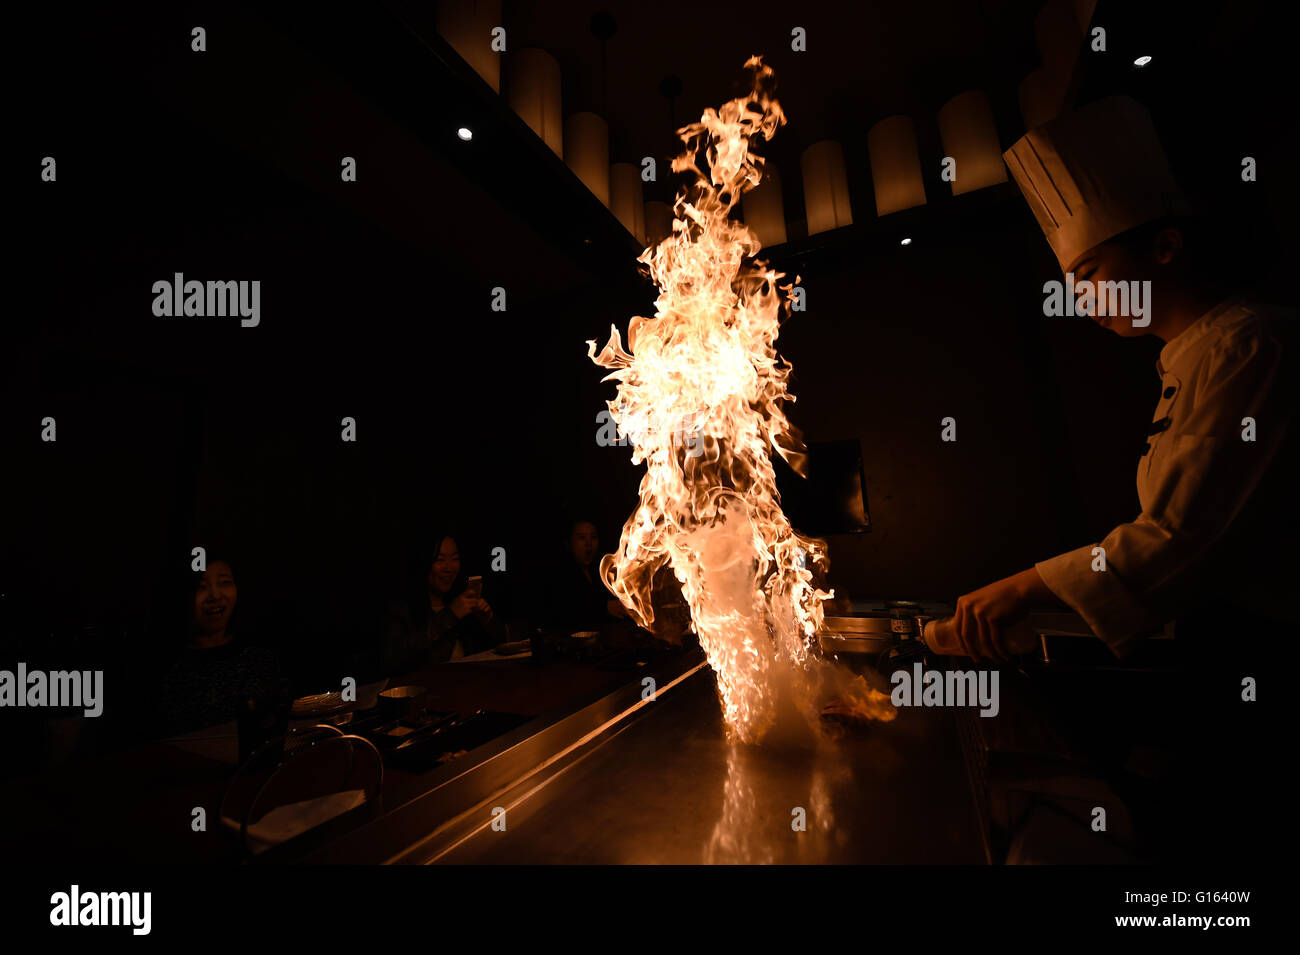 Taiyuan, Taiyuan, CHN. 6th May, 2016. Taiyuan, China - May 6 2016: (EDITORIAL USE ONLY. CHINA OUT ) Brandy is burning when she is ciiking steak. The whole process is very entertaining. Li Rufang, born in 1993, Taiyuan Shanxi. She learned teppanyaki from her cook brother in Beijing. After years she went back to Taiyuan and worked in Japanese Restaurant of five-star Mandarin Oriental Hotel. © SIPA Asia/ZUMA Wire/Alamy Live News Stock Photo